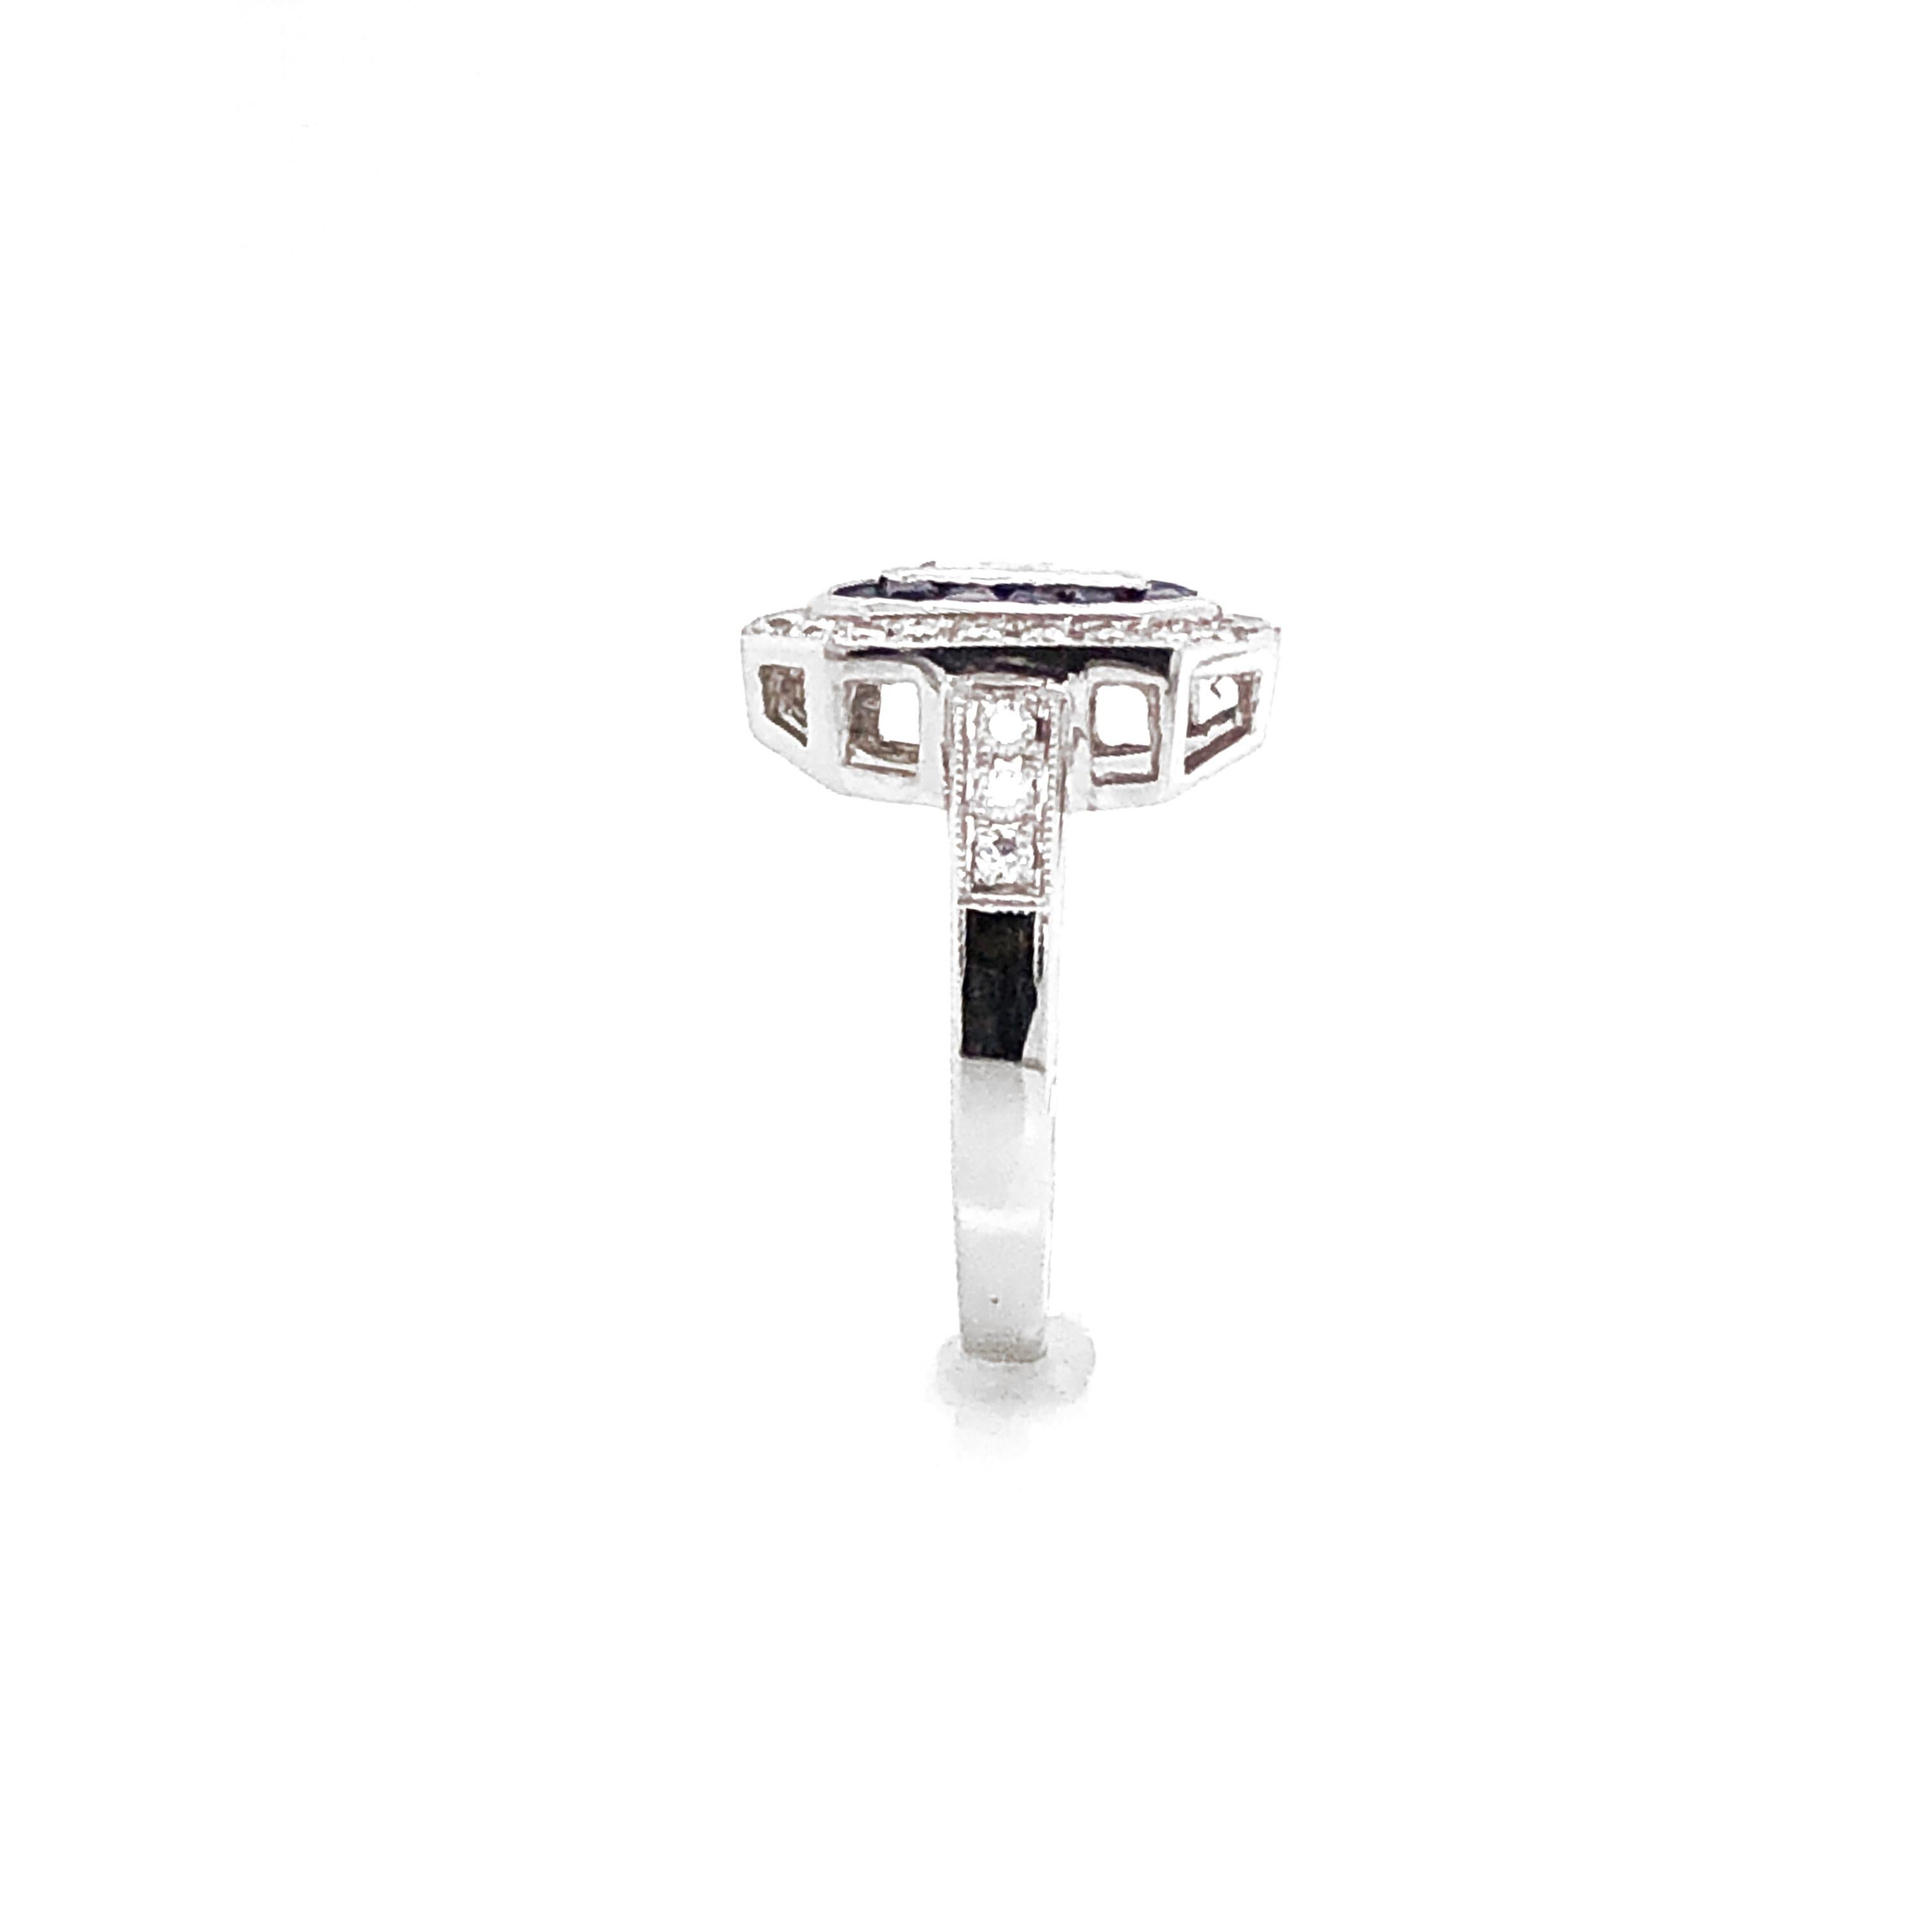 GIA Certified Emerald Cut Diamond 1.01 Carat Sapphires Diamonds Cocktail Ring For Sale 2